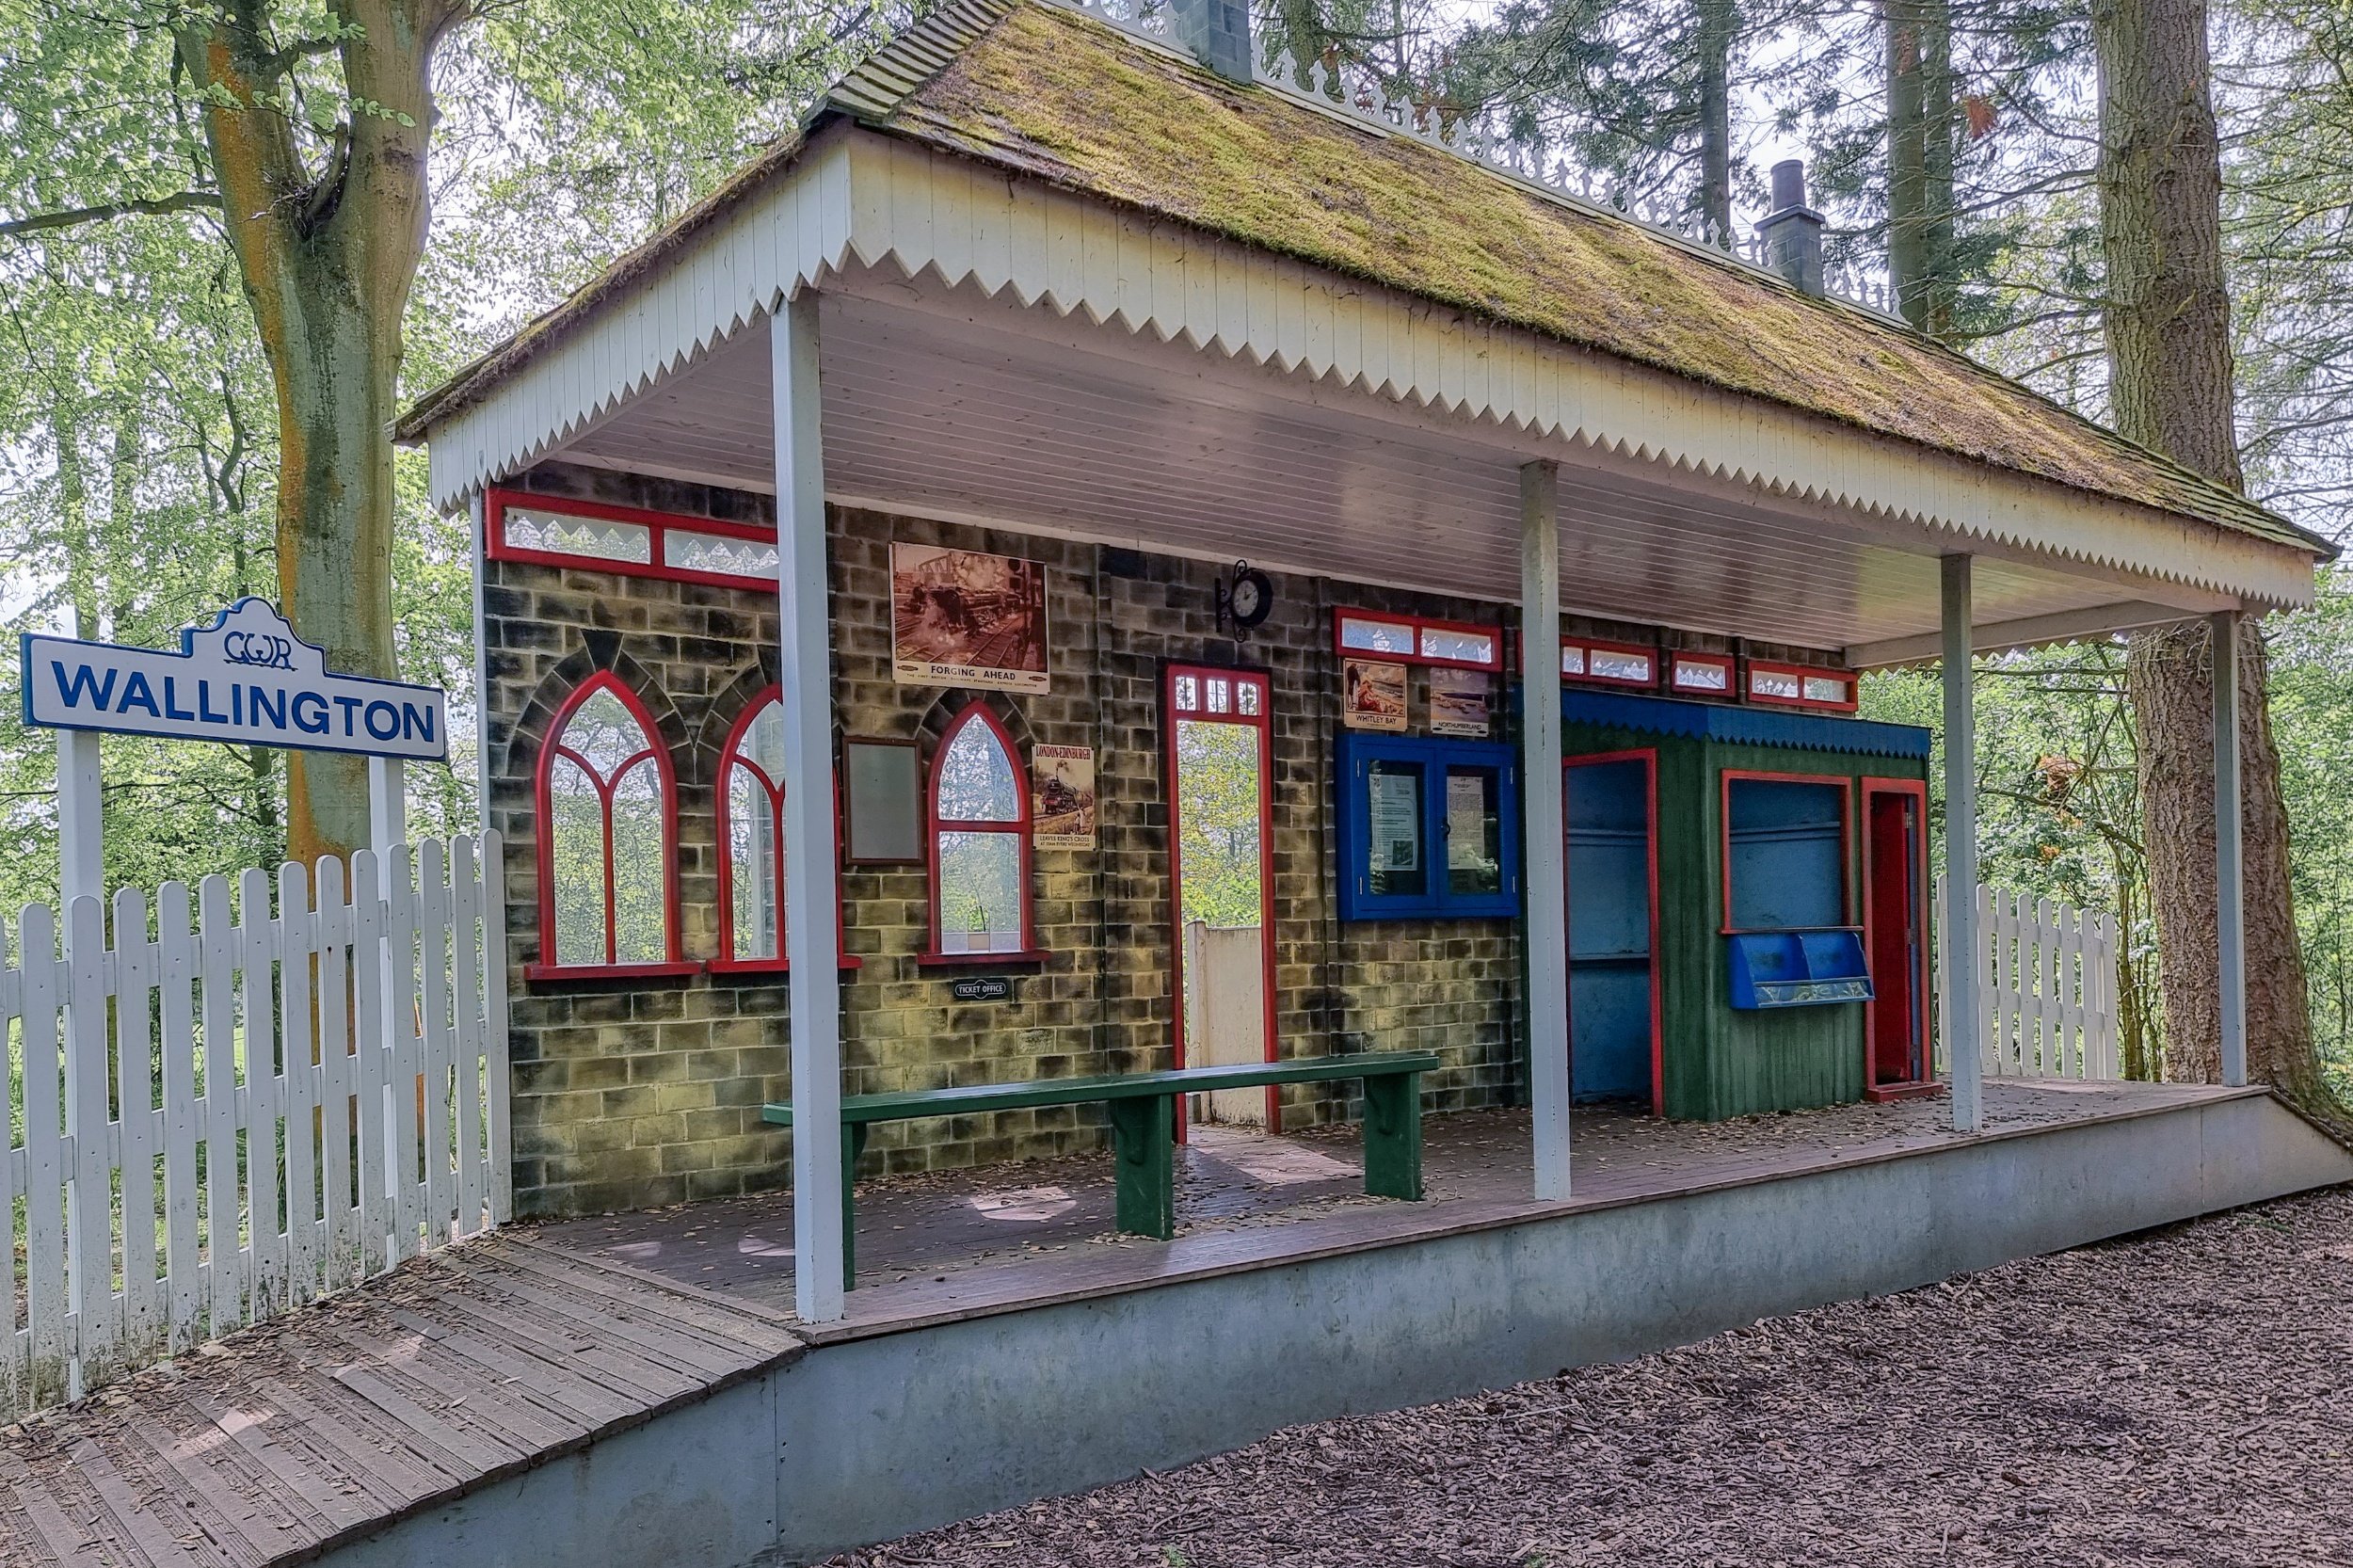 A play station, complete with sign saying, "Wallington", a ticket office window and an office for the station master.